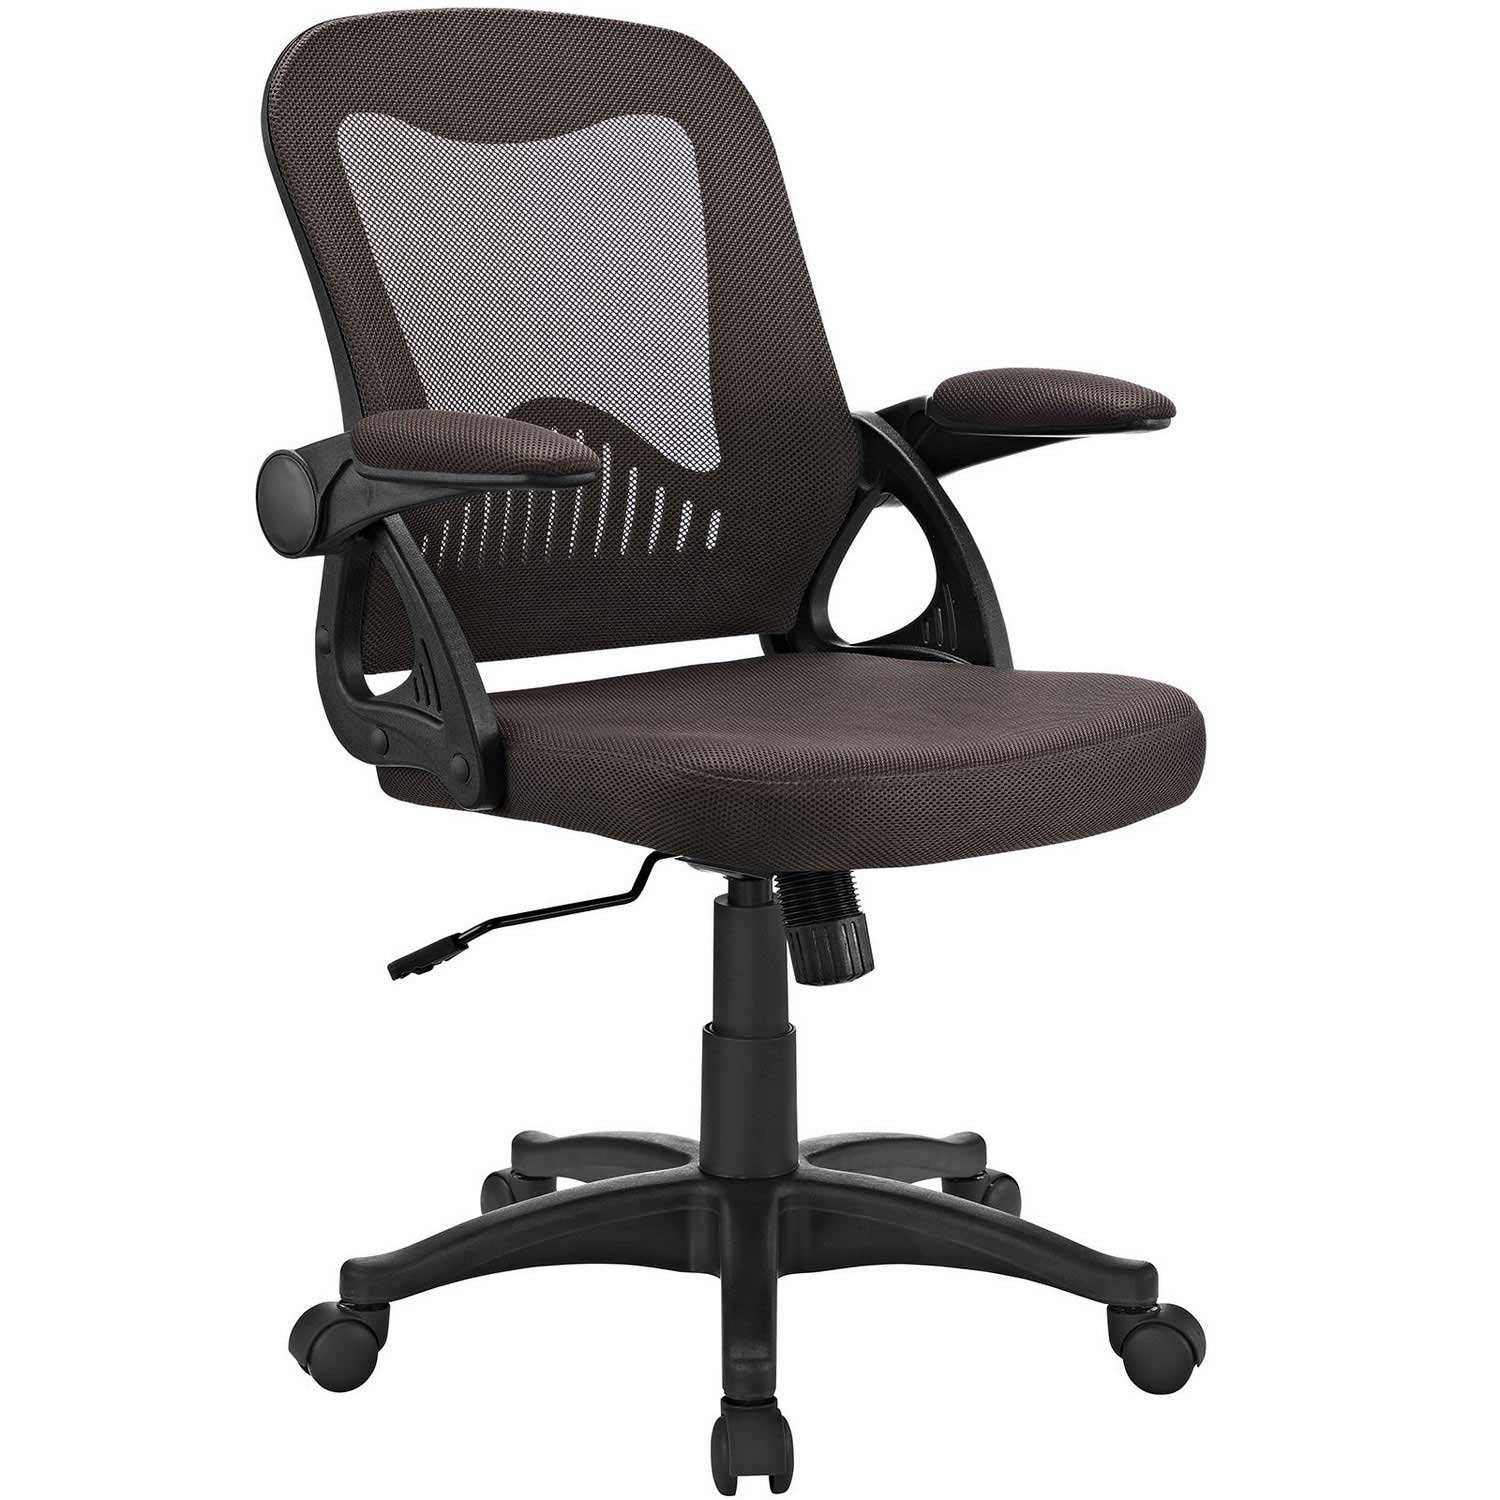 Modway Advance Office Chair - Brown